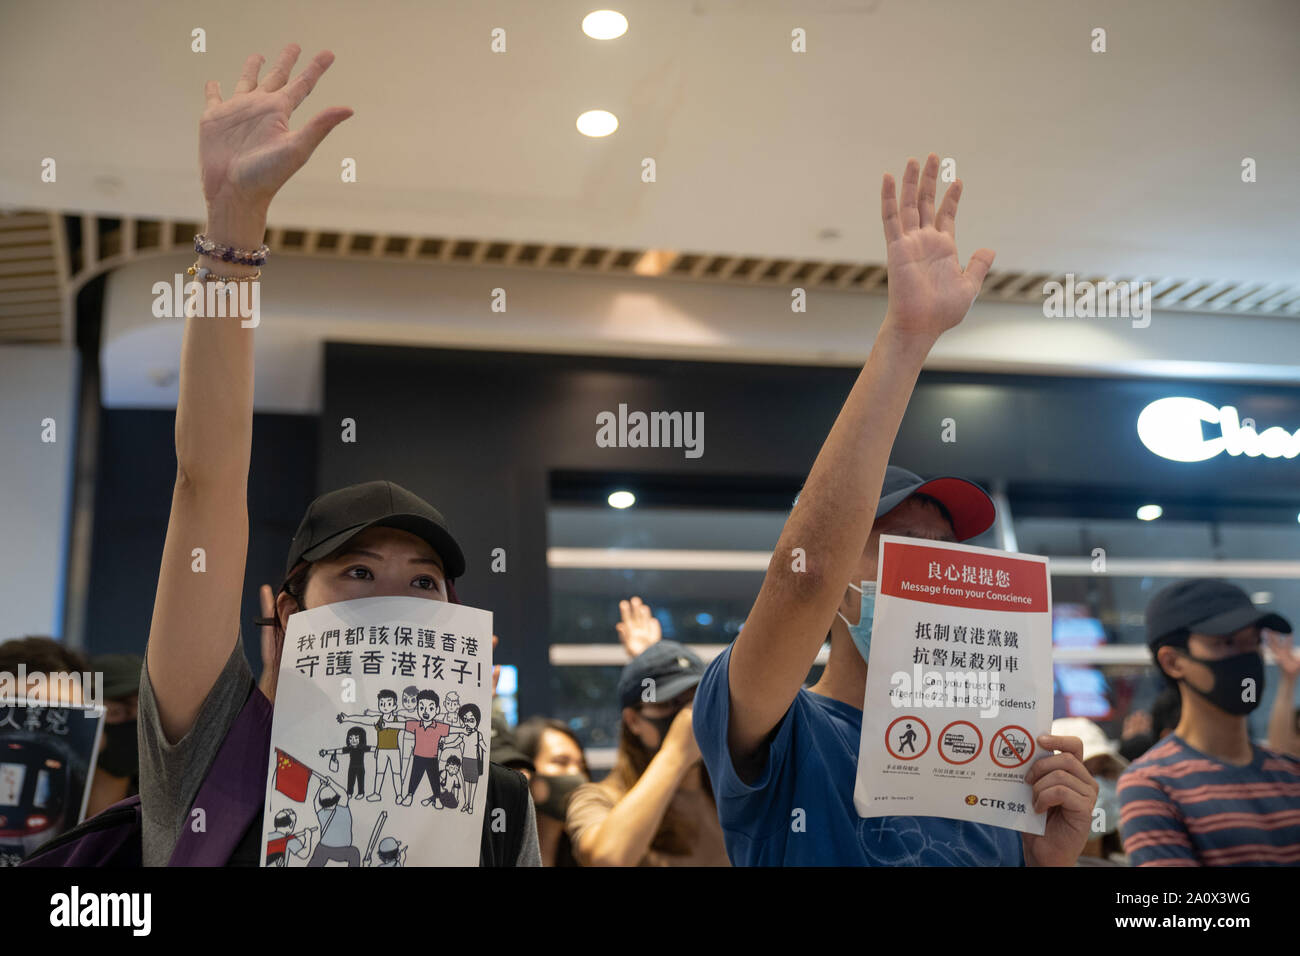 Pro-democracy protesters holding placards while singing songs and shouting slogans as they gather in a shopping mall during a rally in Yeun Long.Pro-democracy protesters have continued demonstrations across Hong Kong, calling for the city's Chief Executive Carrie Lam to immediately meet the rest of their demands, including an independent inquiry into police brutality, the retraction of the word “riot” to describe the rallies, and genuine universal suffrage, as the territory faces a leadership crisis. Stock Photo